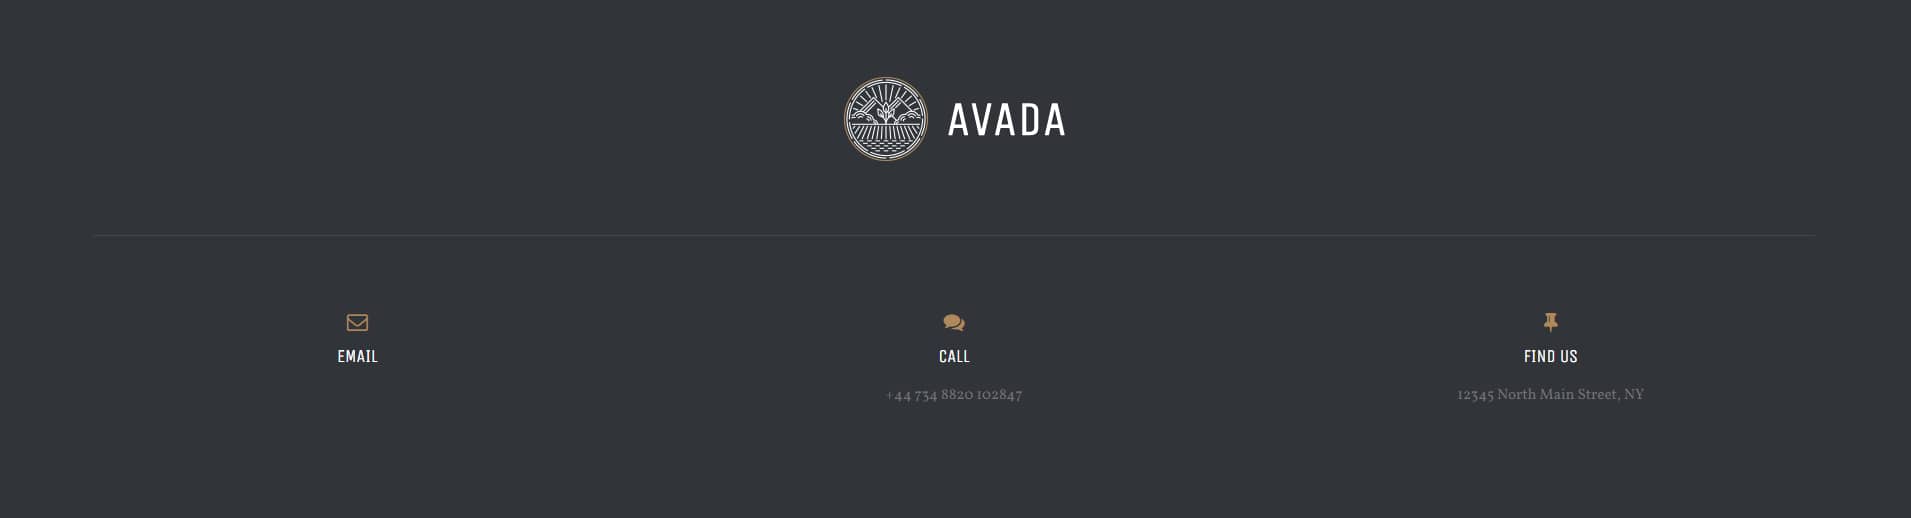 Avada Cafe Contact Information